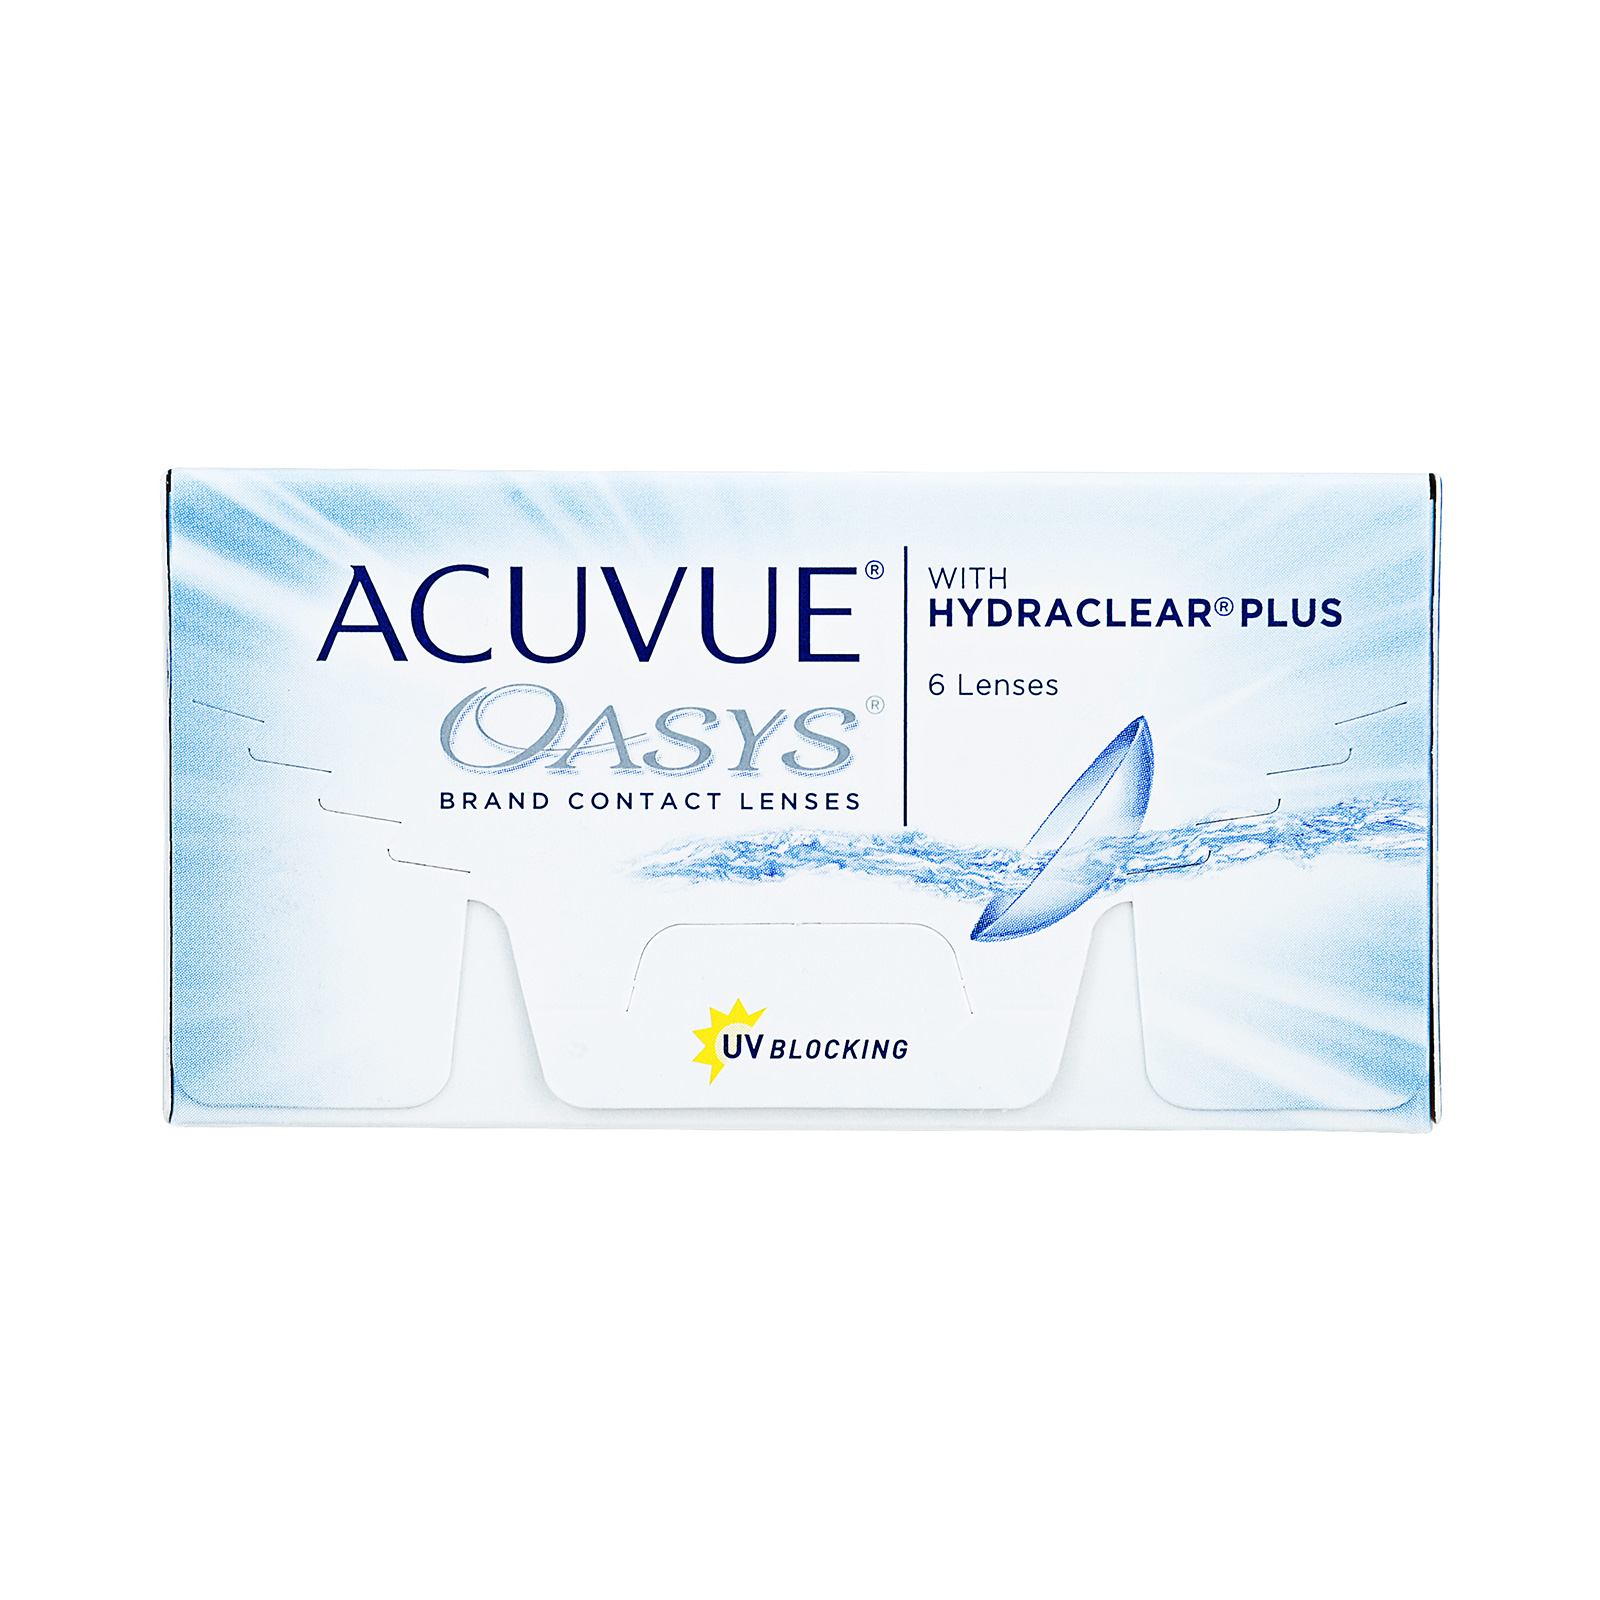 Acuvue Oasys 2-Week With HydraClear Plus